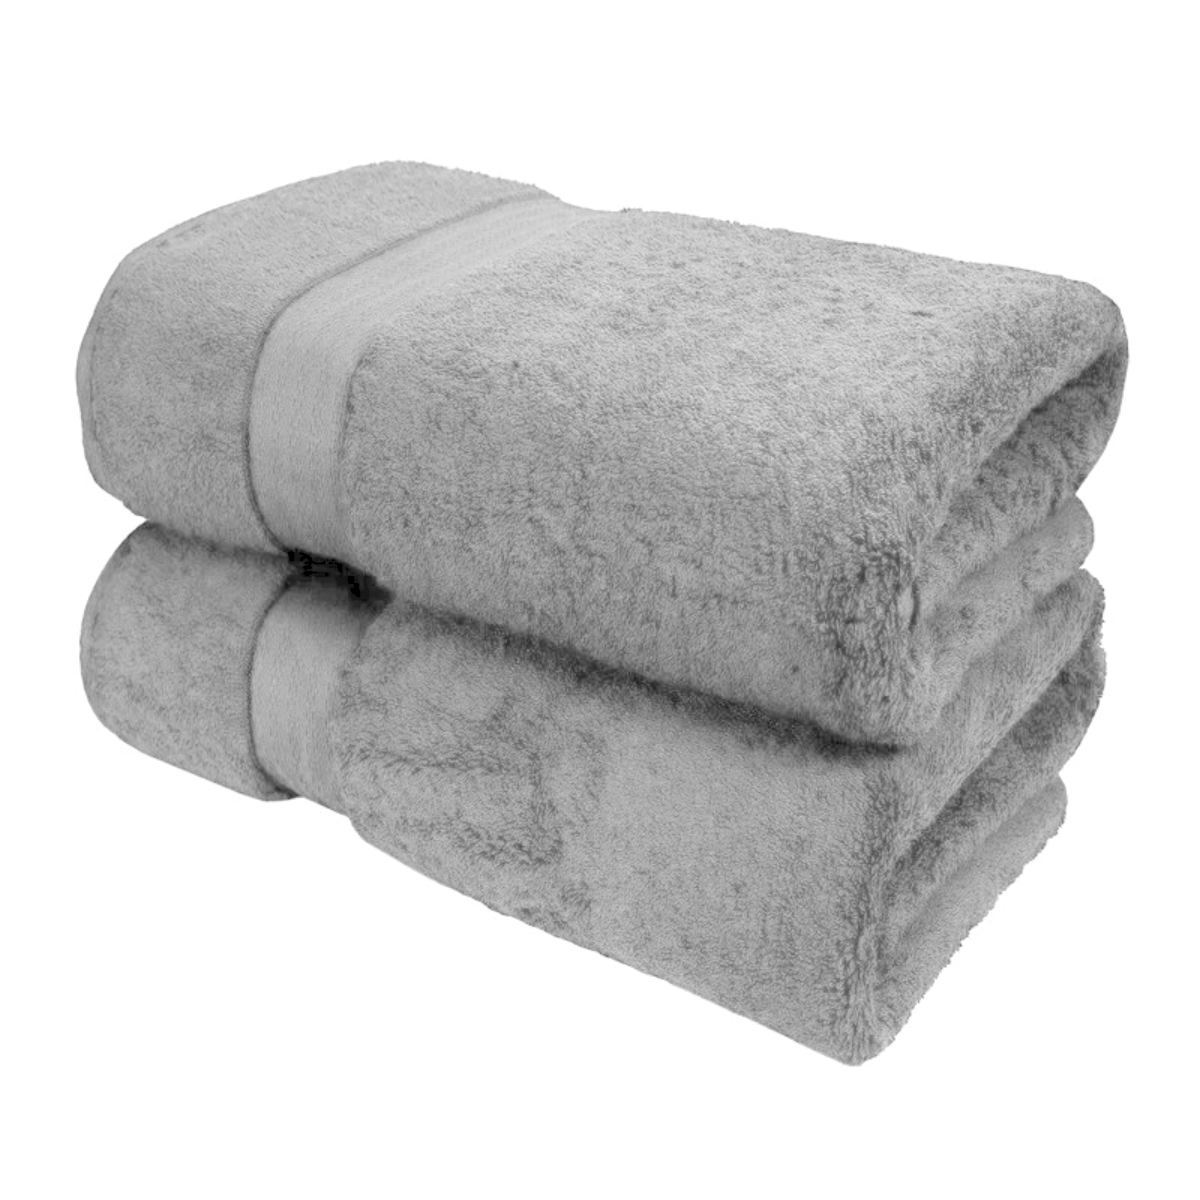 Cheap Price Pack of 2 Super 600 GSM Luxury Soft Extra Large Bath Sheet